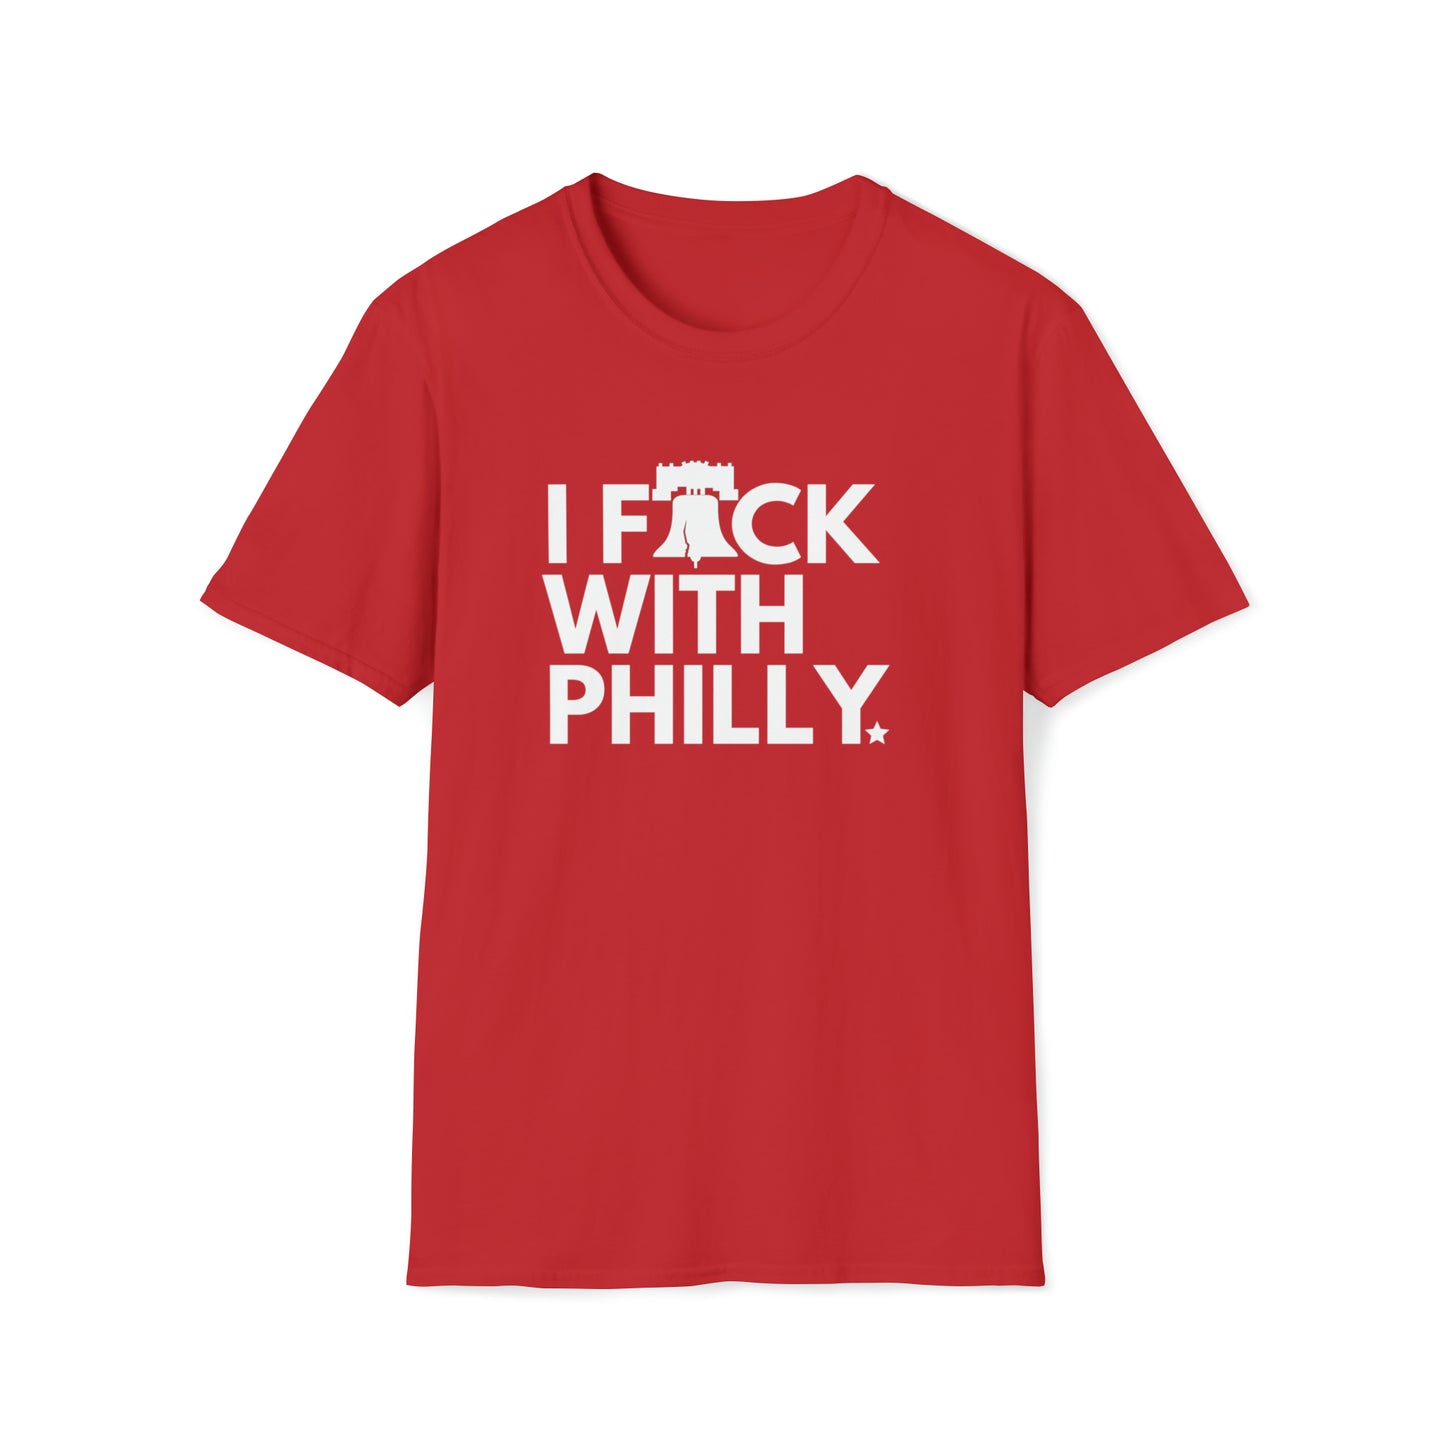 I F*ck with Philly - Unisex Softstyle T-Shirt